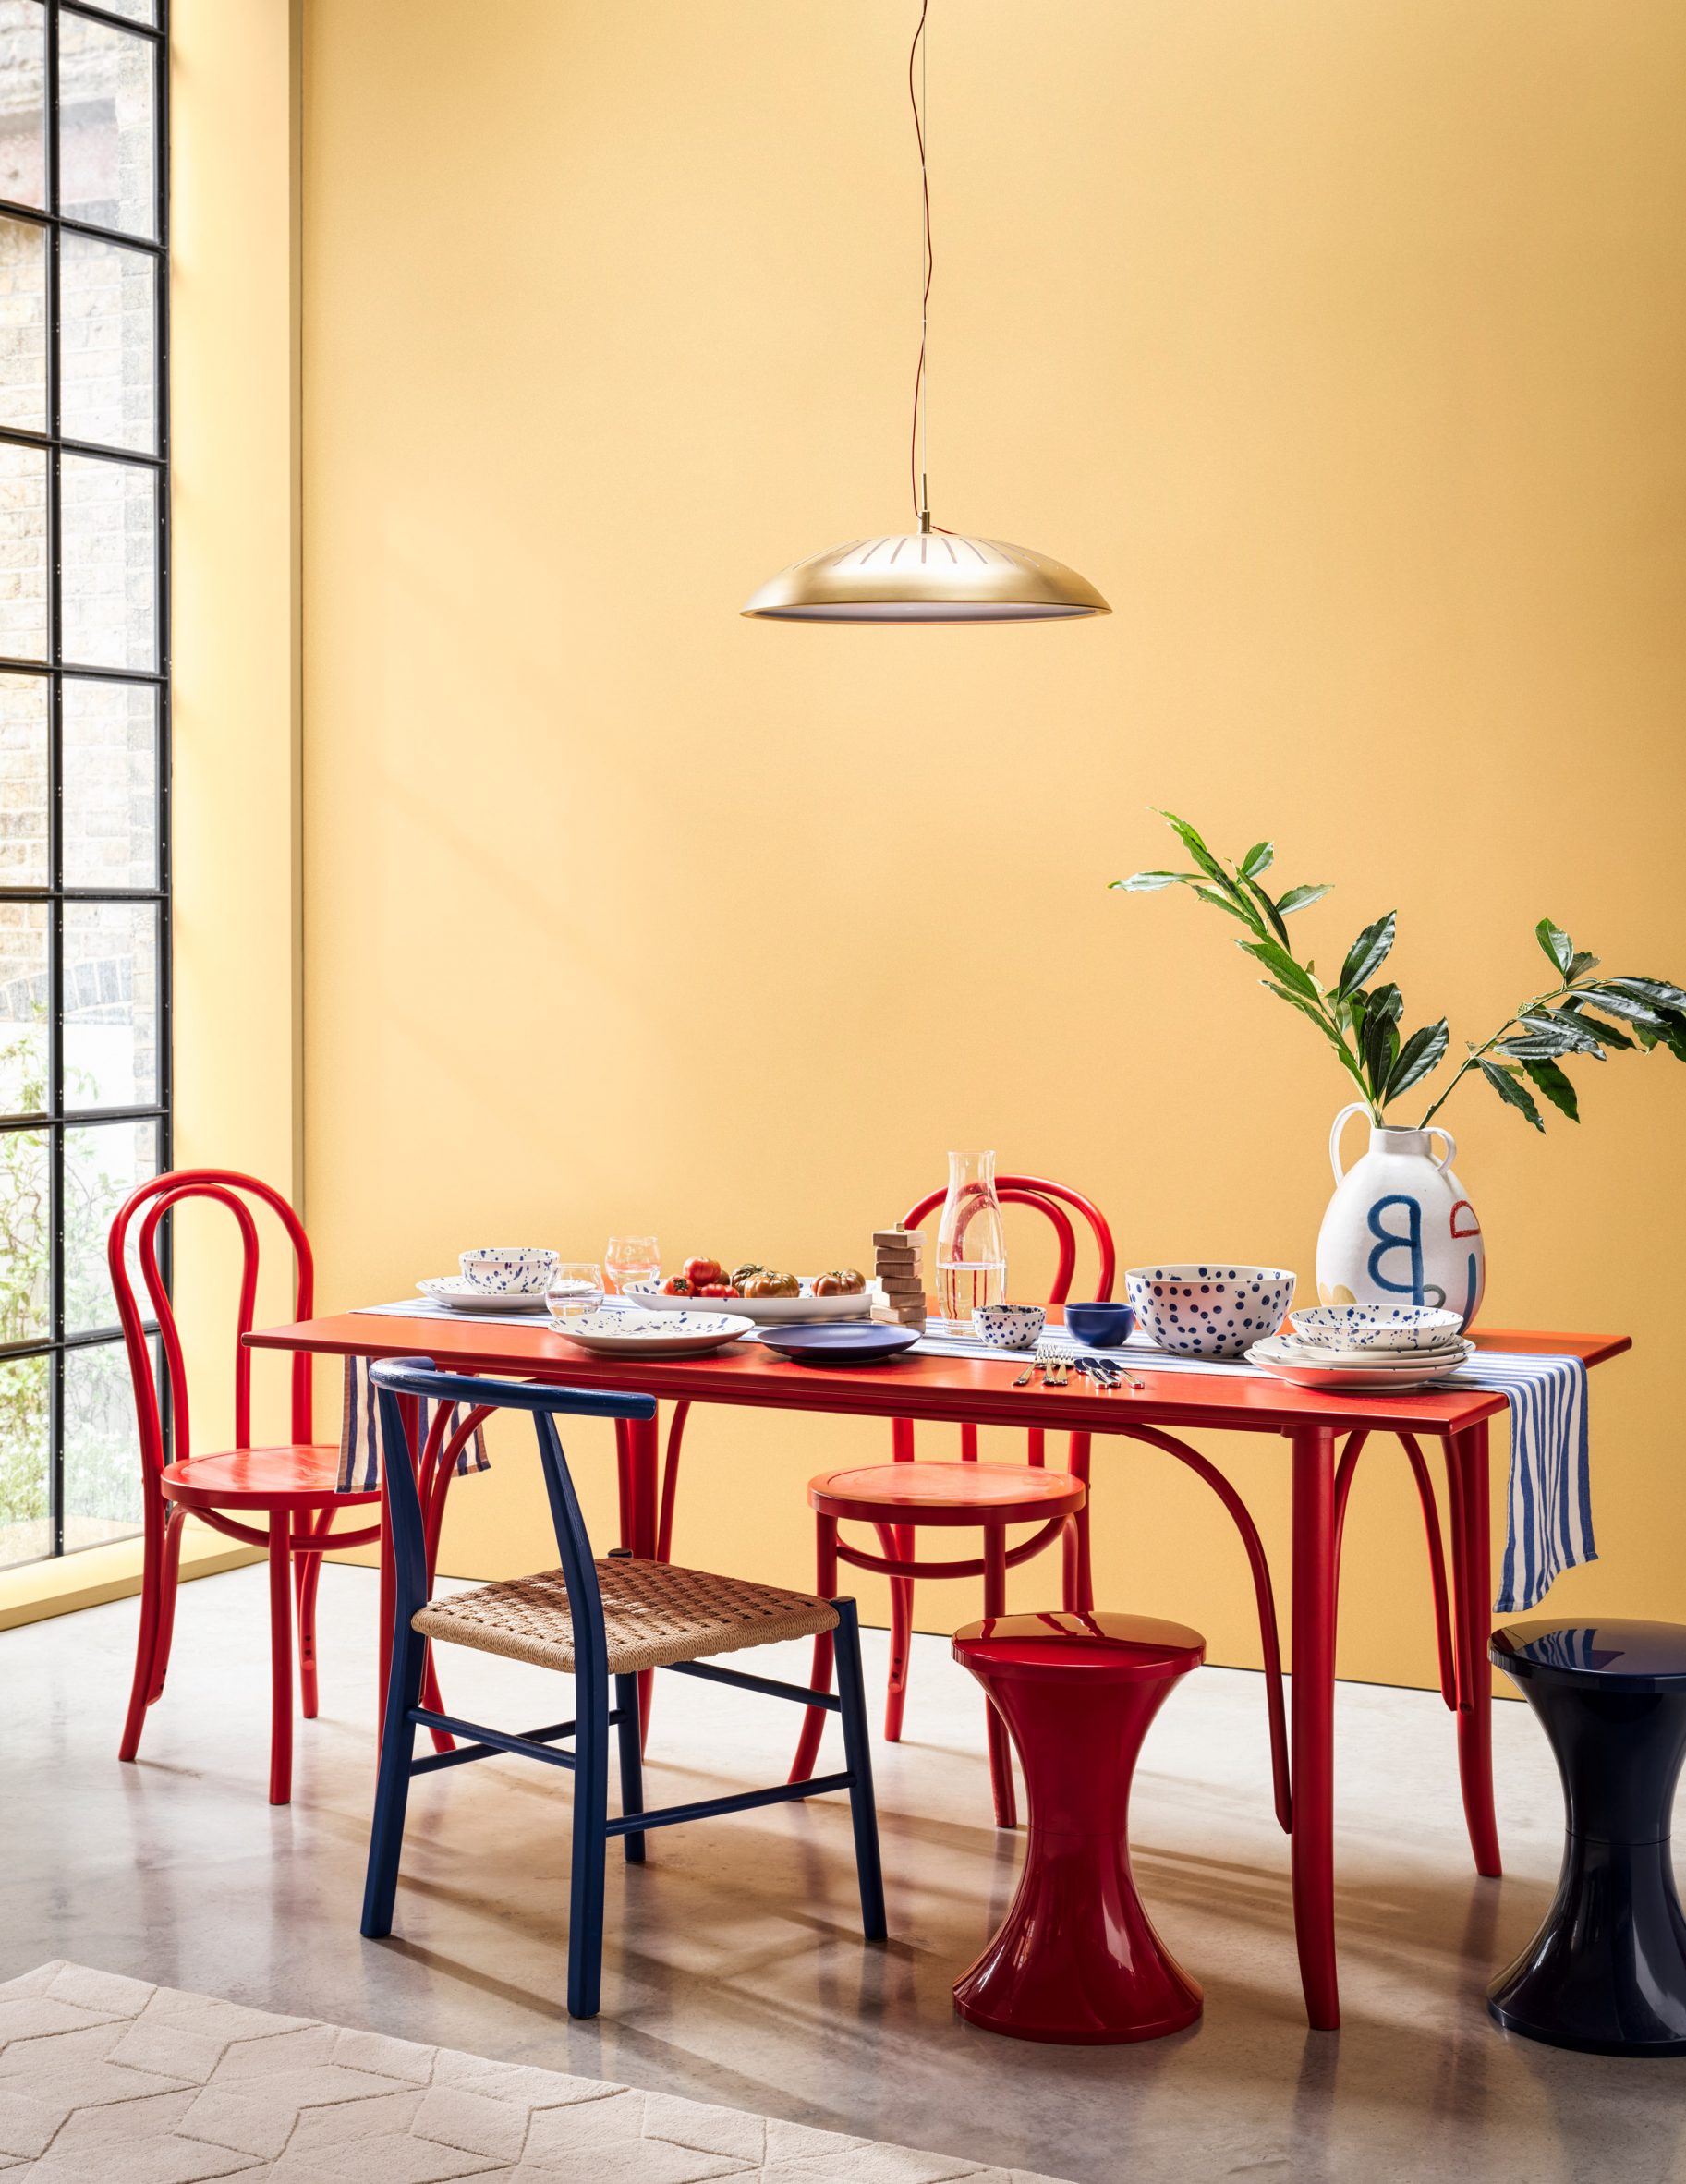 Lifestyle photo of a dinner table setting with a bright red long table and red and blue mismatched chairs, as well as tableware